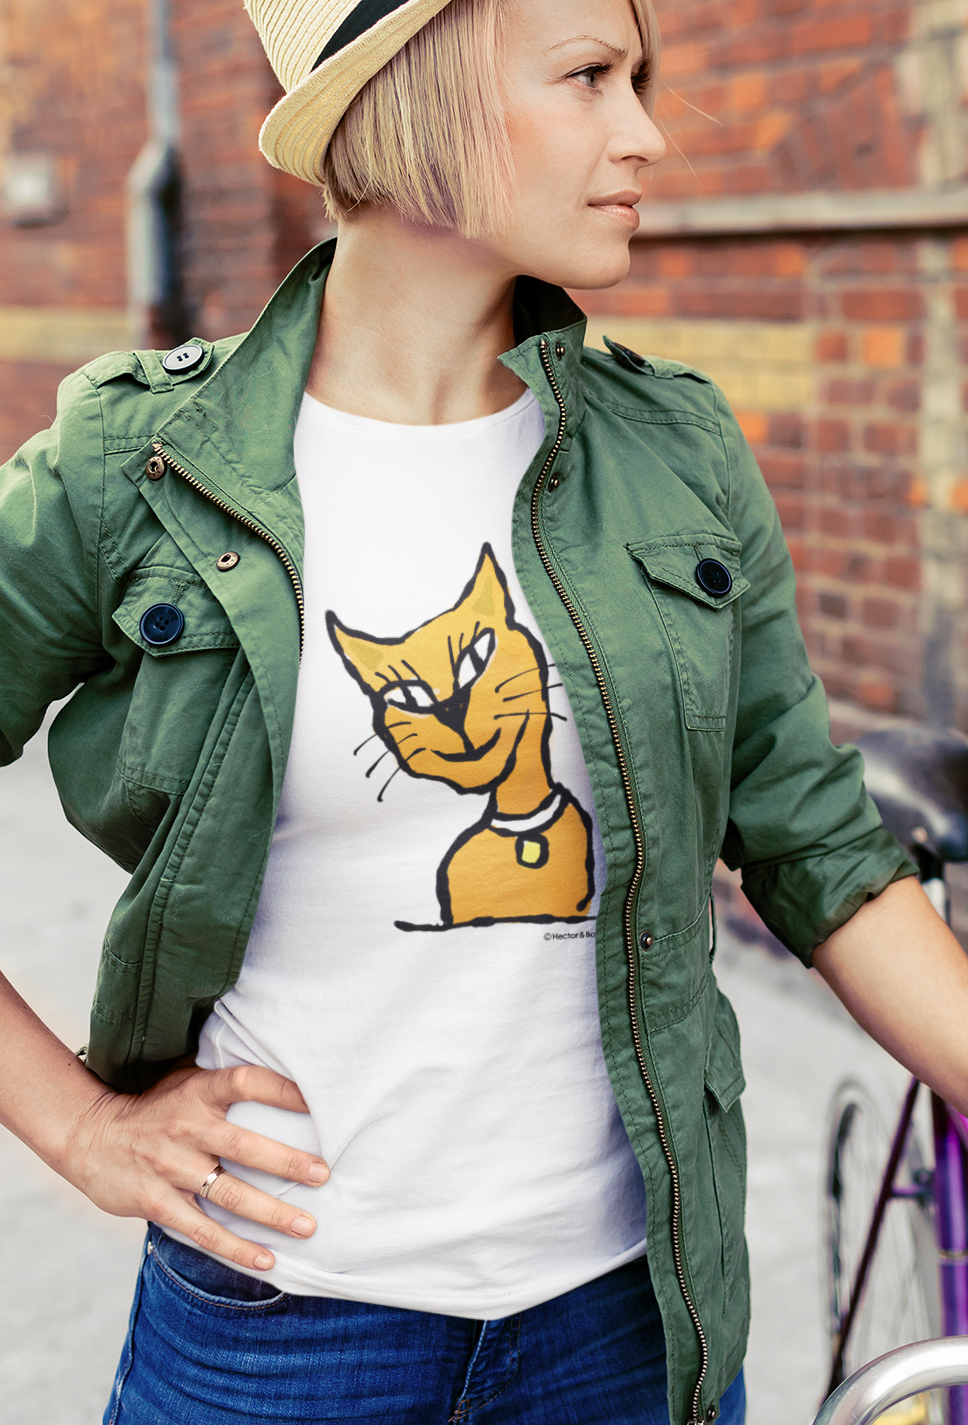 Ginger Cat T-shirt - Young woman wearing an Illustrated white colour vegan cotton Cat T-shirt by Hector and Bone